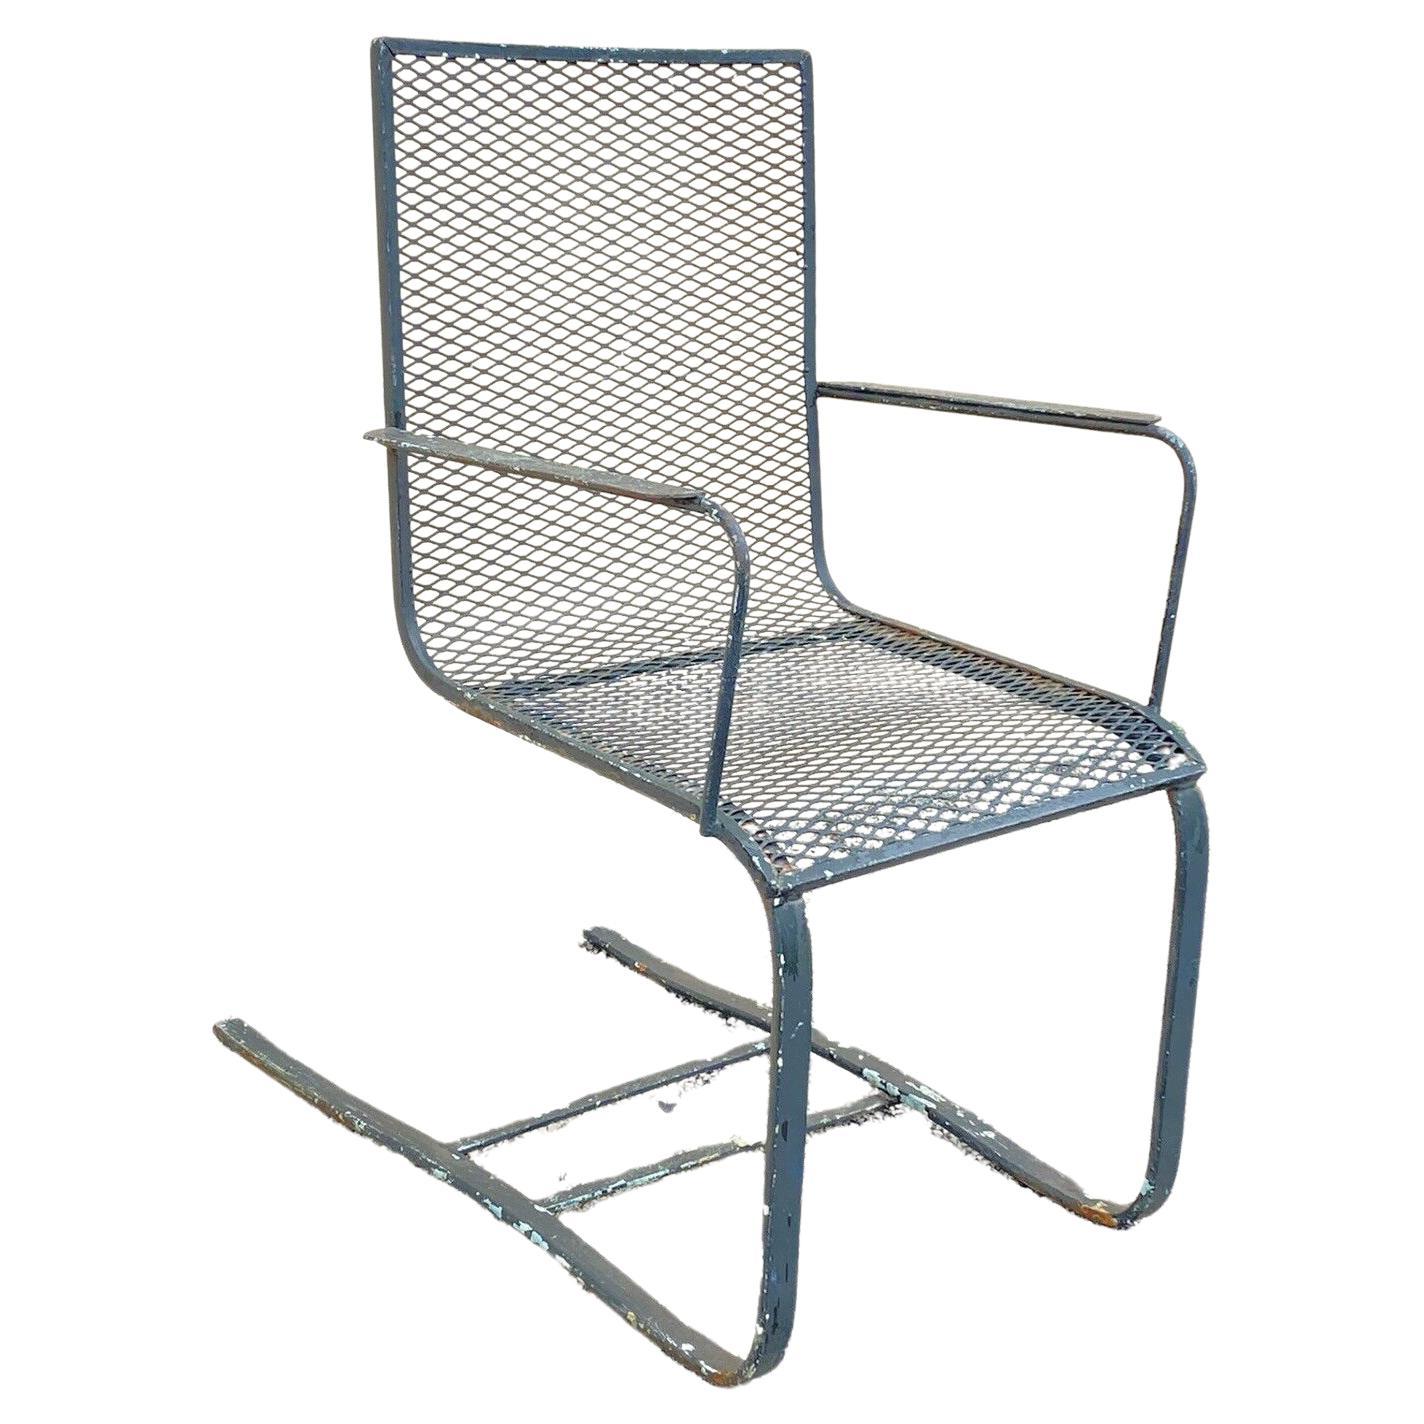 Industrial Modern Wrought Iron Metal Mesh Spring Cantilever Garden Patio Chair For Sale